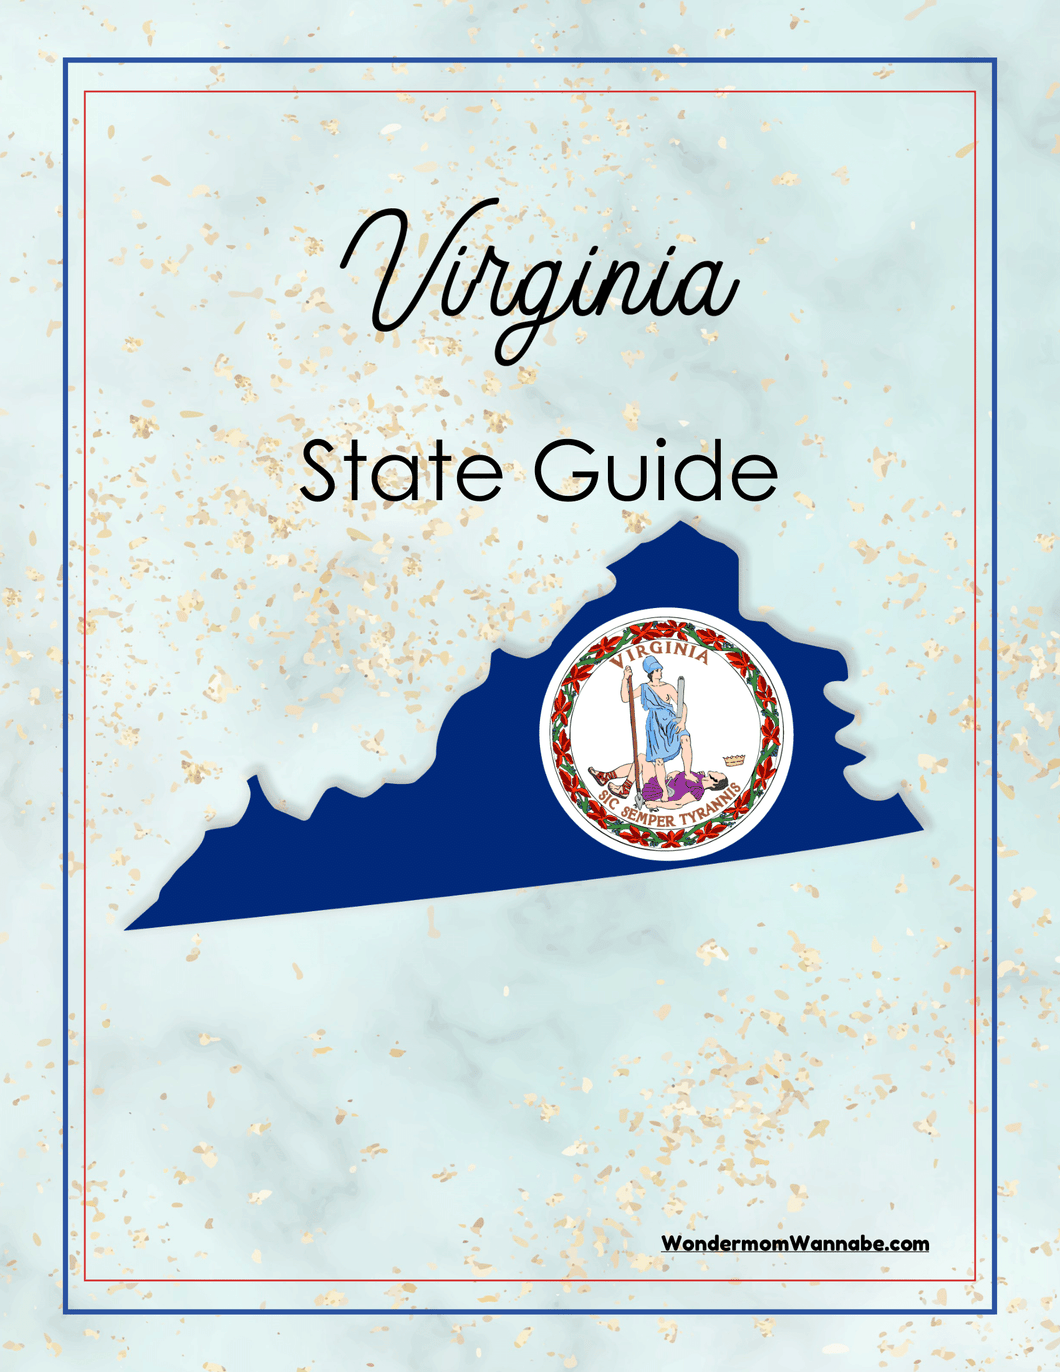 Virginia Travel Guide and Activity Kit for Kids